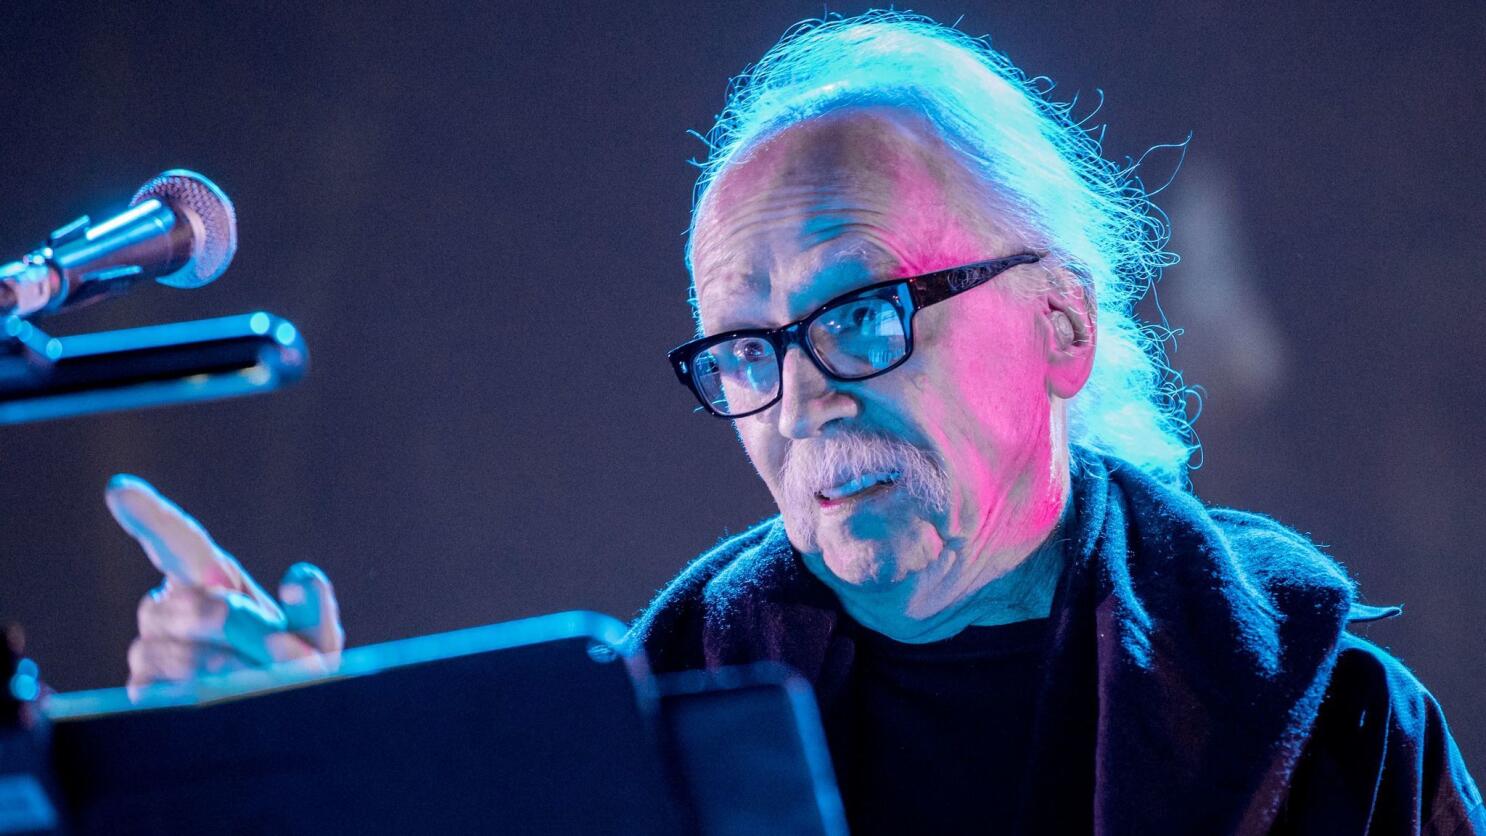 The Best John Carpenter Movie Theme Songs (Halloween, The Thing, Prince of  Darkness) 